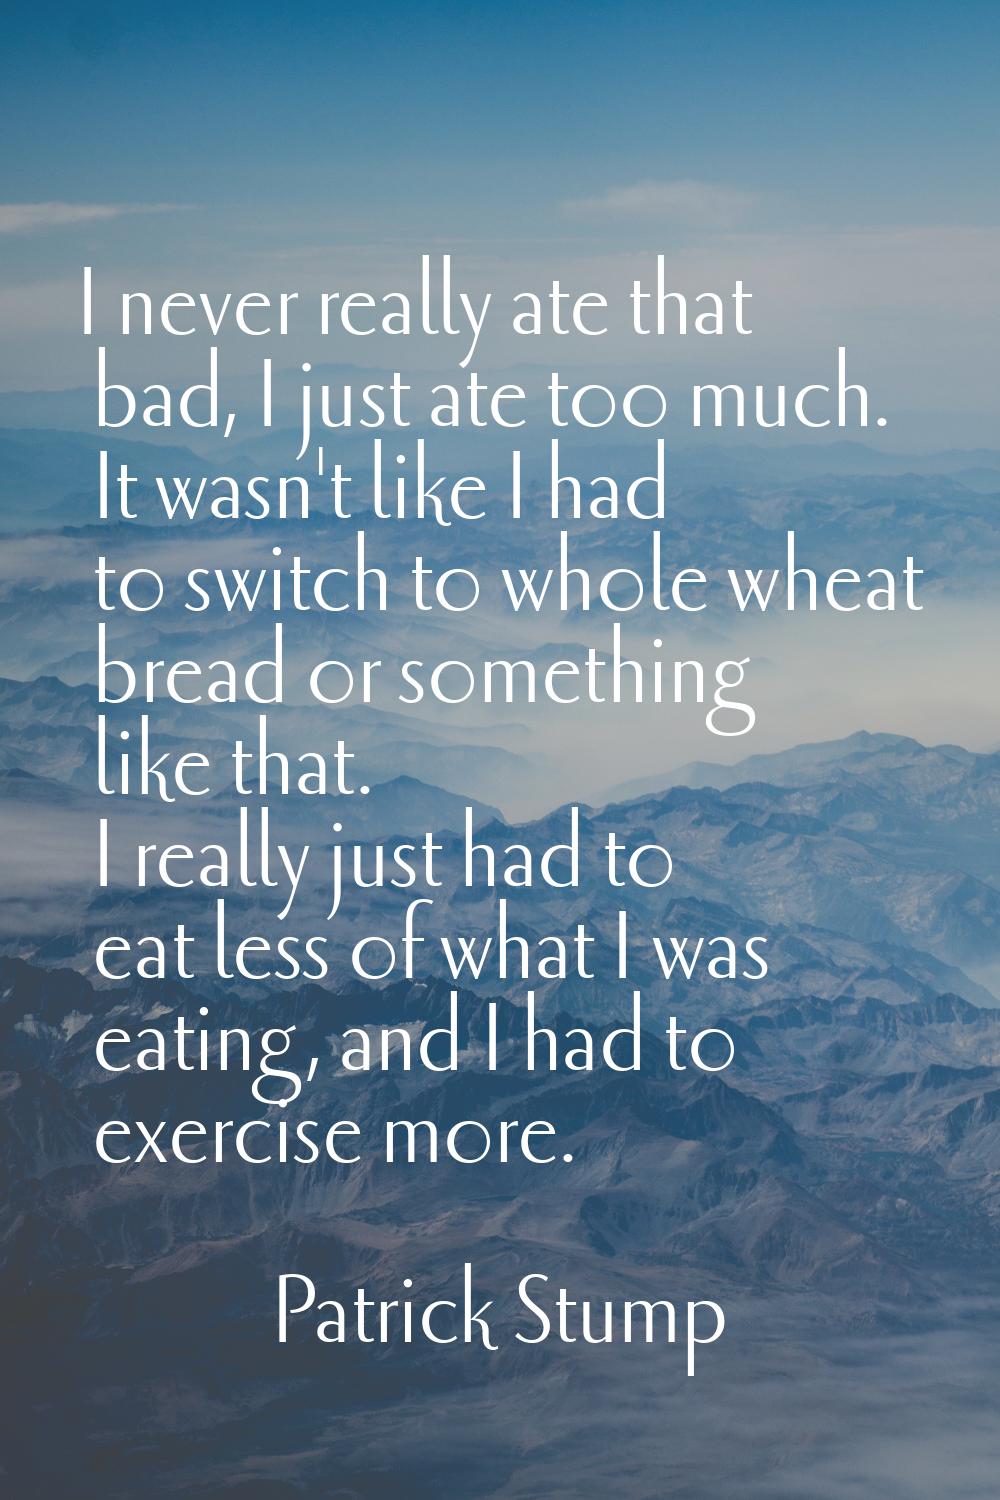 I never really ate that bad, I just ate too much. It wasn't like I had to switch to whole wheat bre